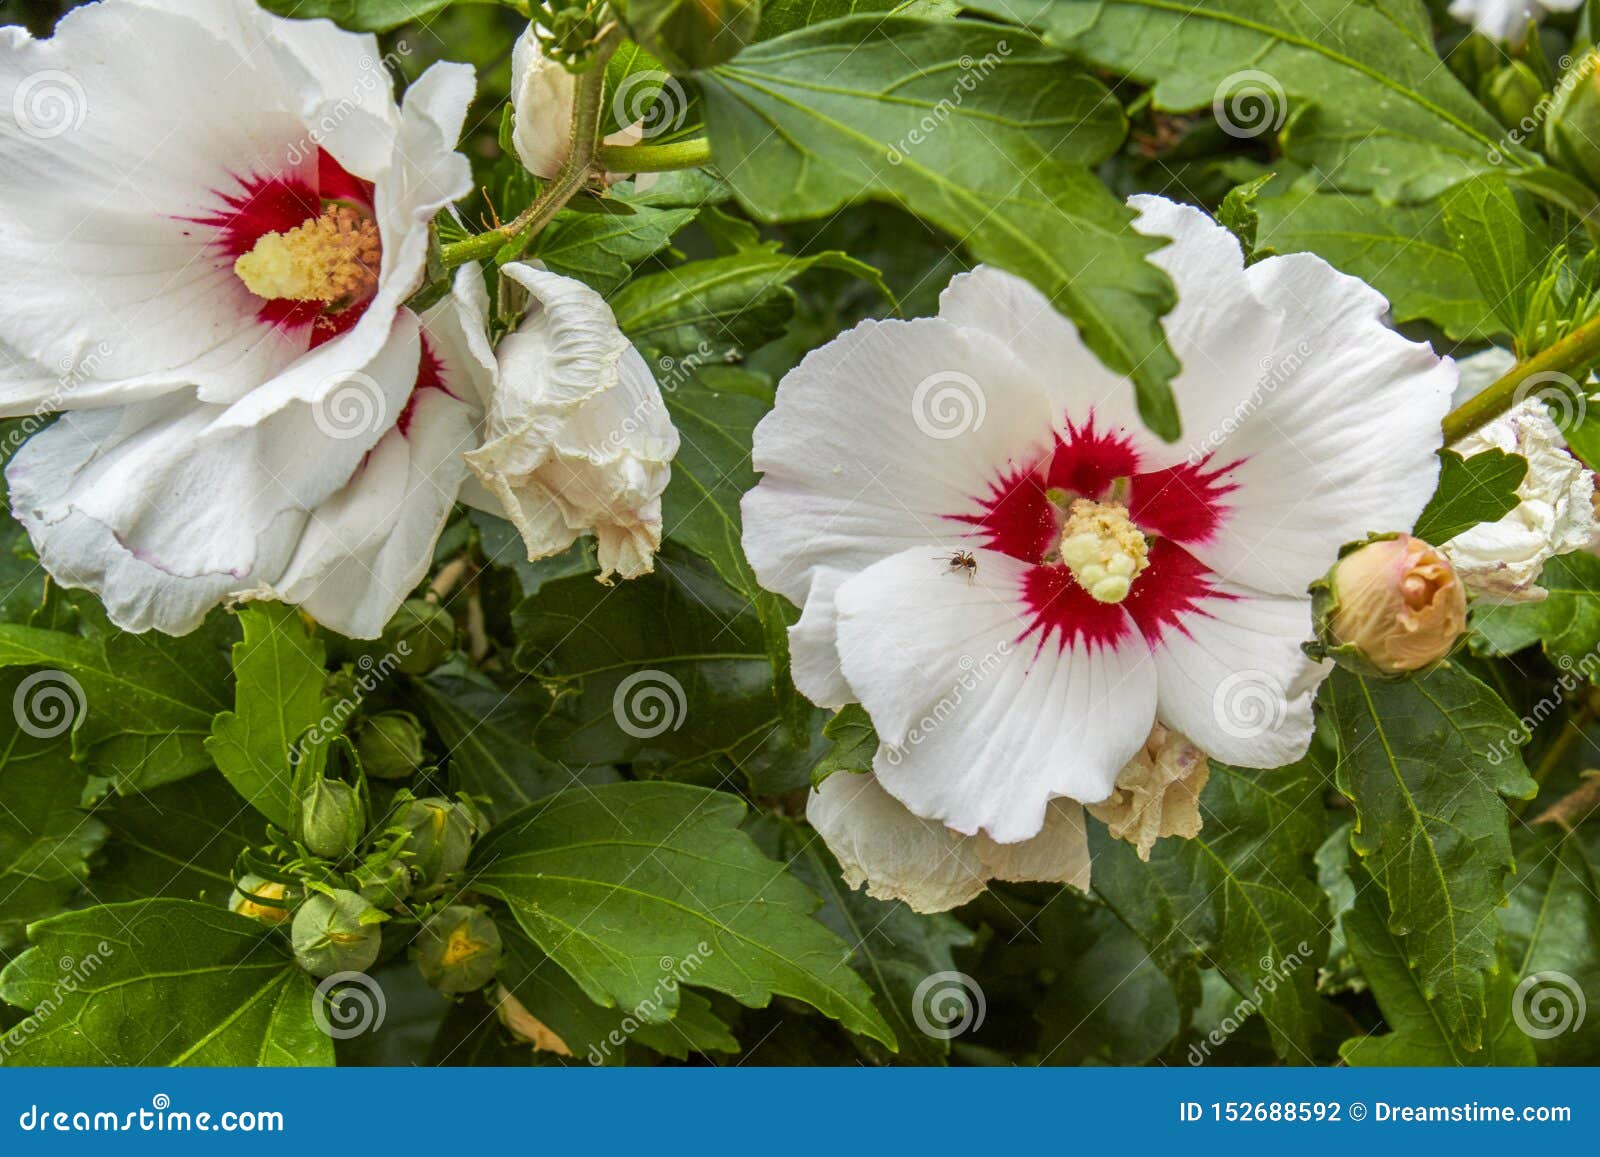 hibiscus syriacus flower with showy columna and a small ant